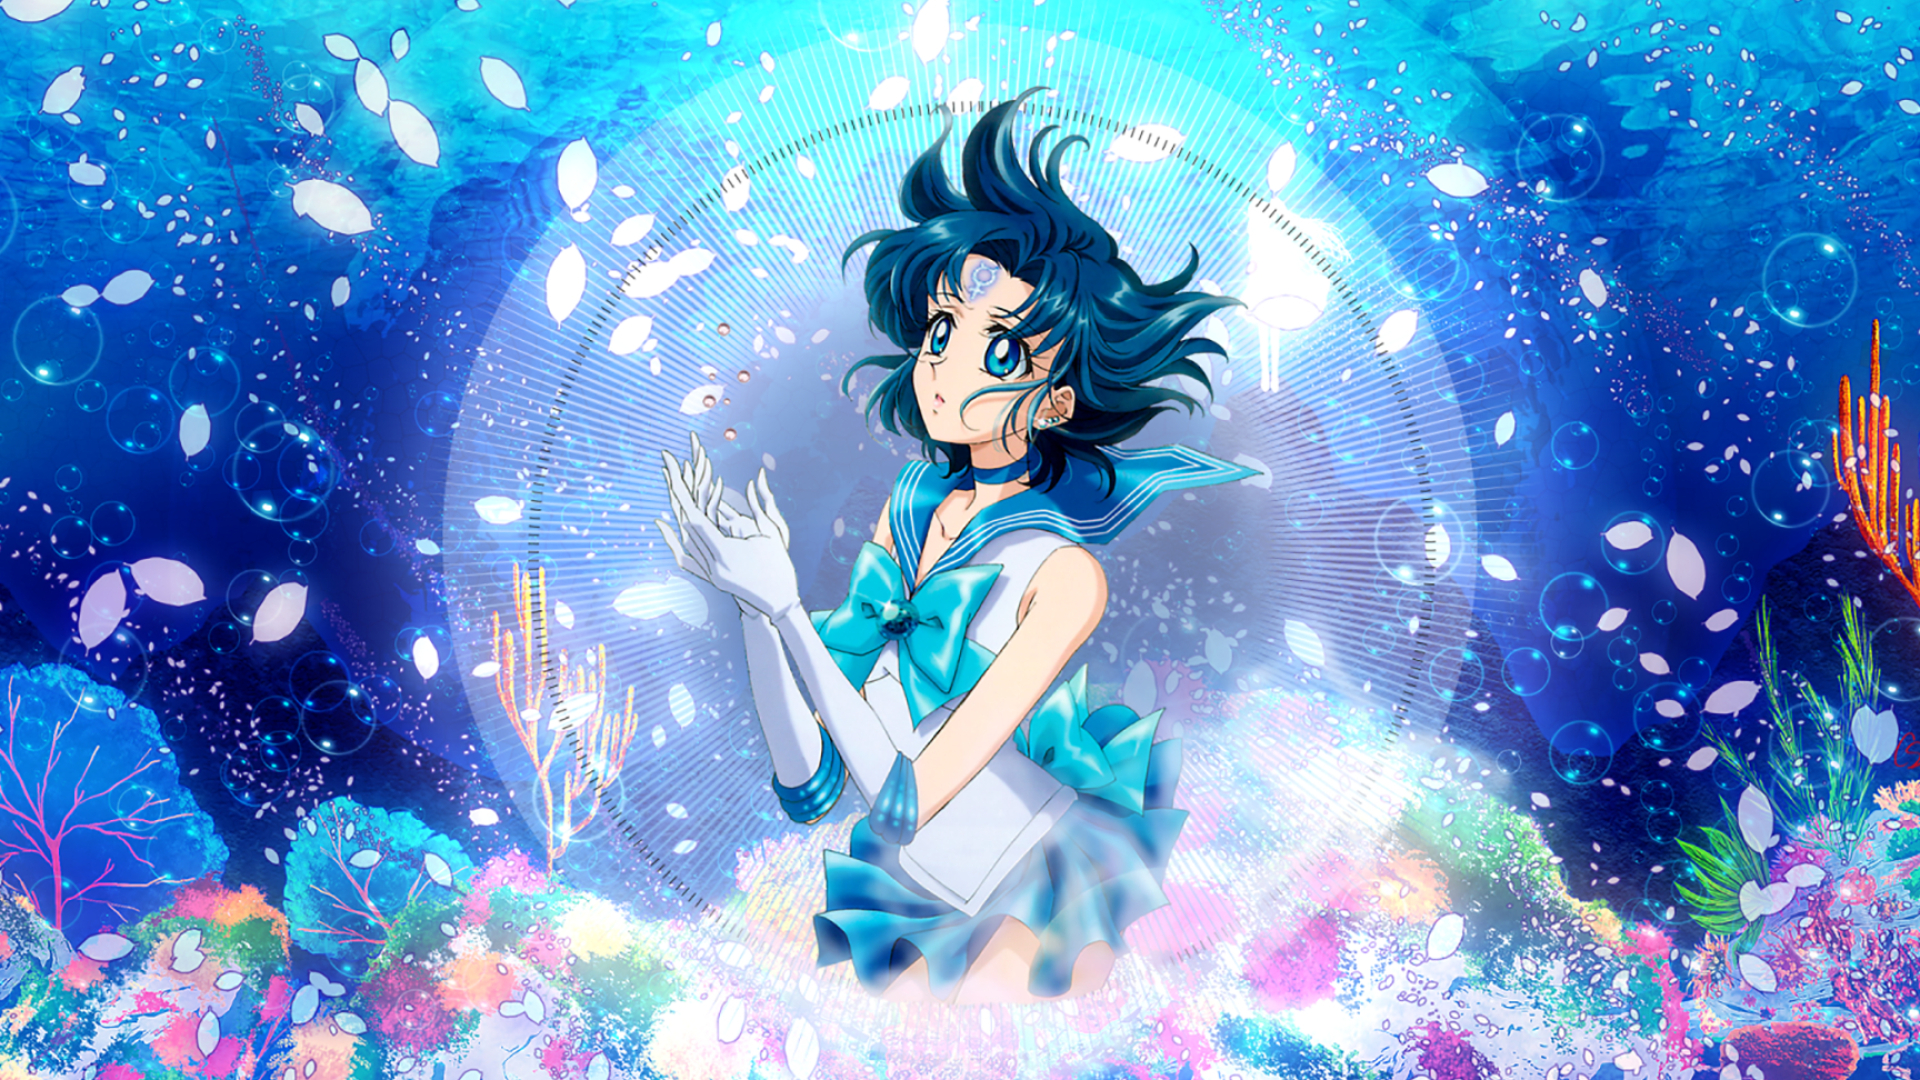 1920x1080 Sailor Mercury Picture In Picture Sea Sailor Moon Anime Anime Girls 2D Petals Blue Hair Blue Eyes Wallpaper Resolution: ID:1348337